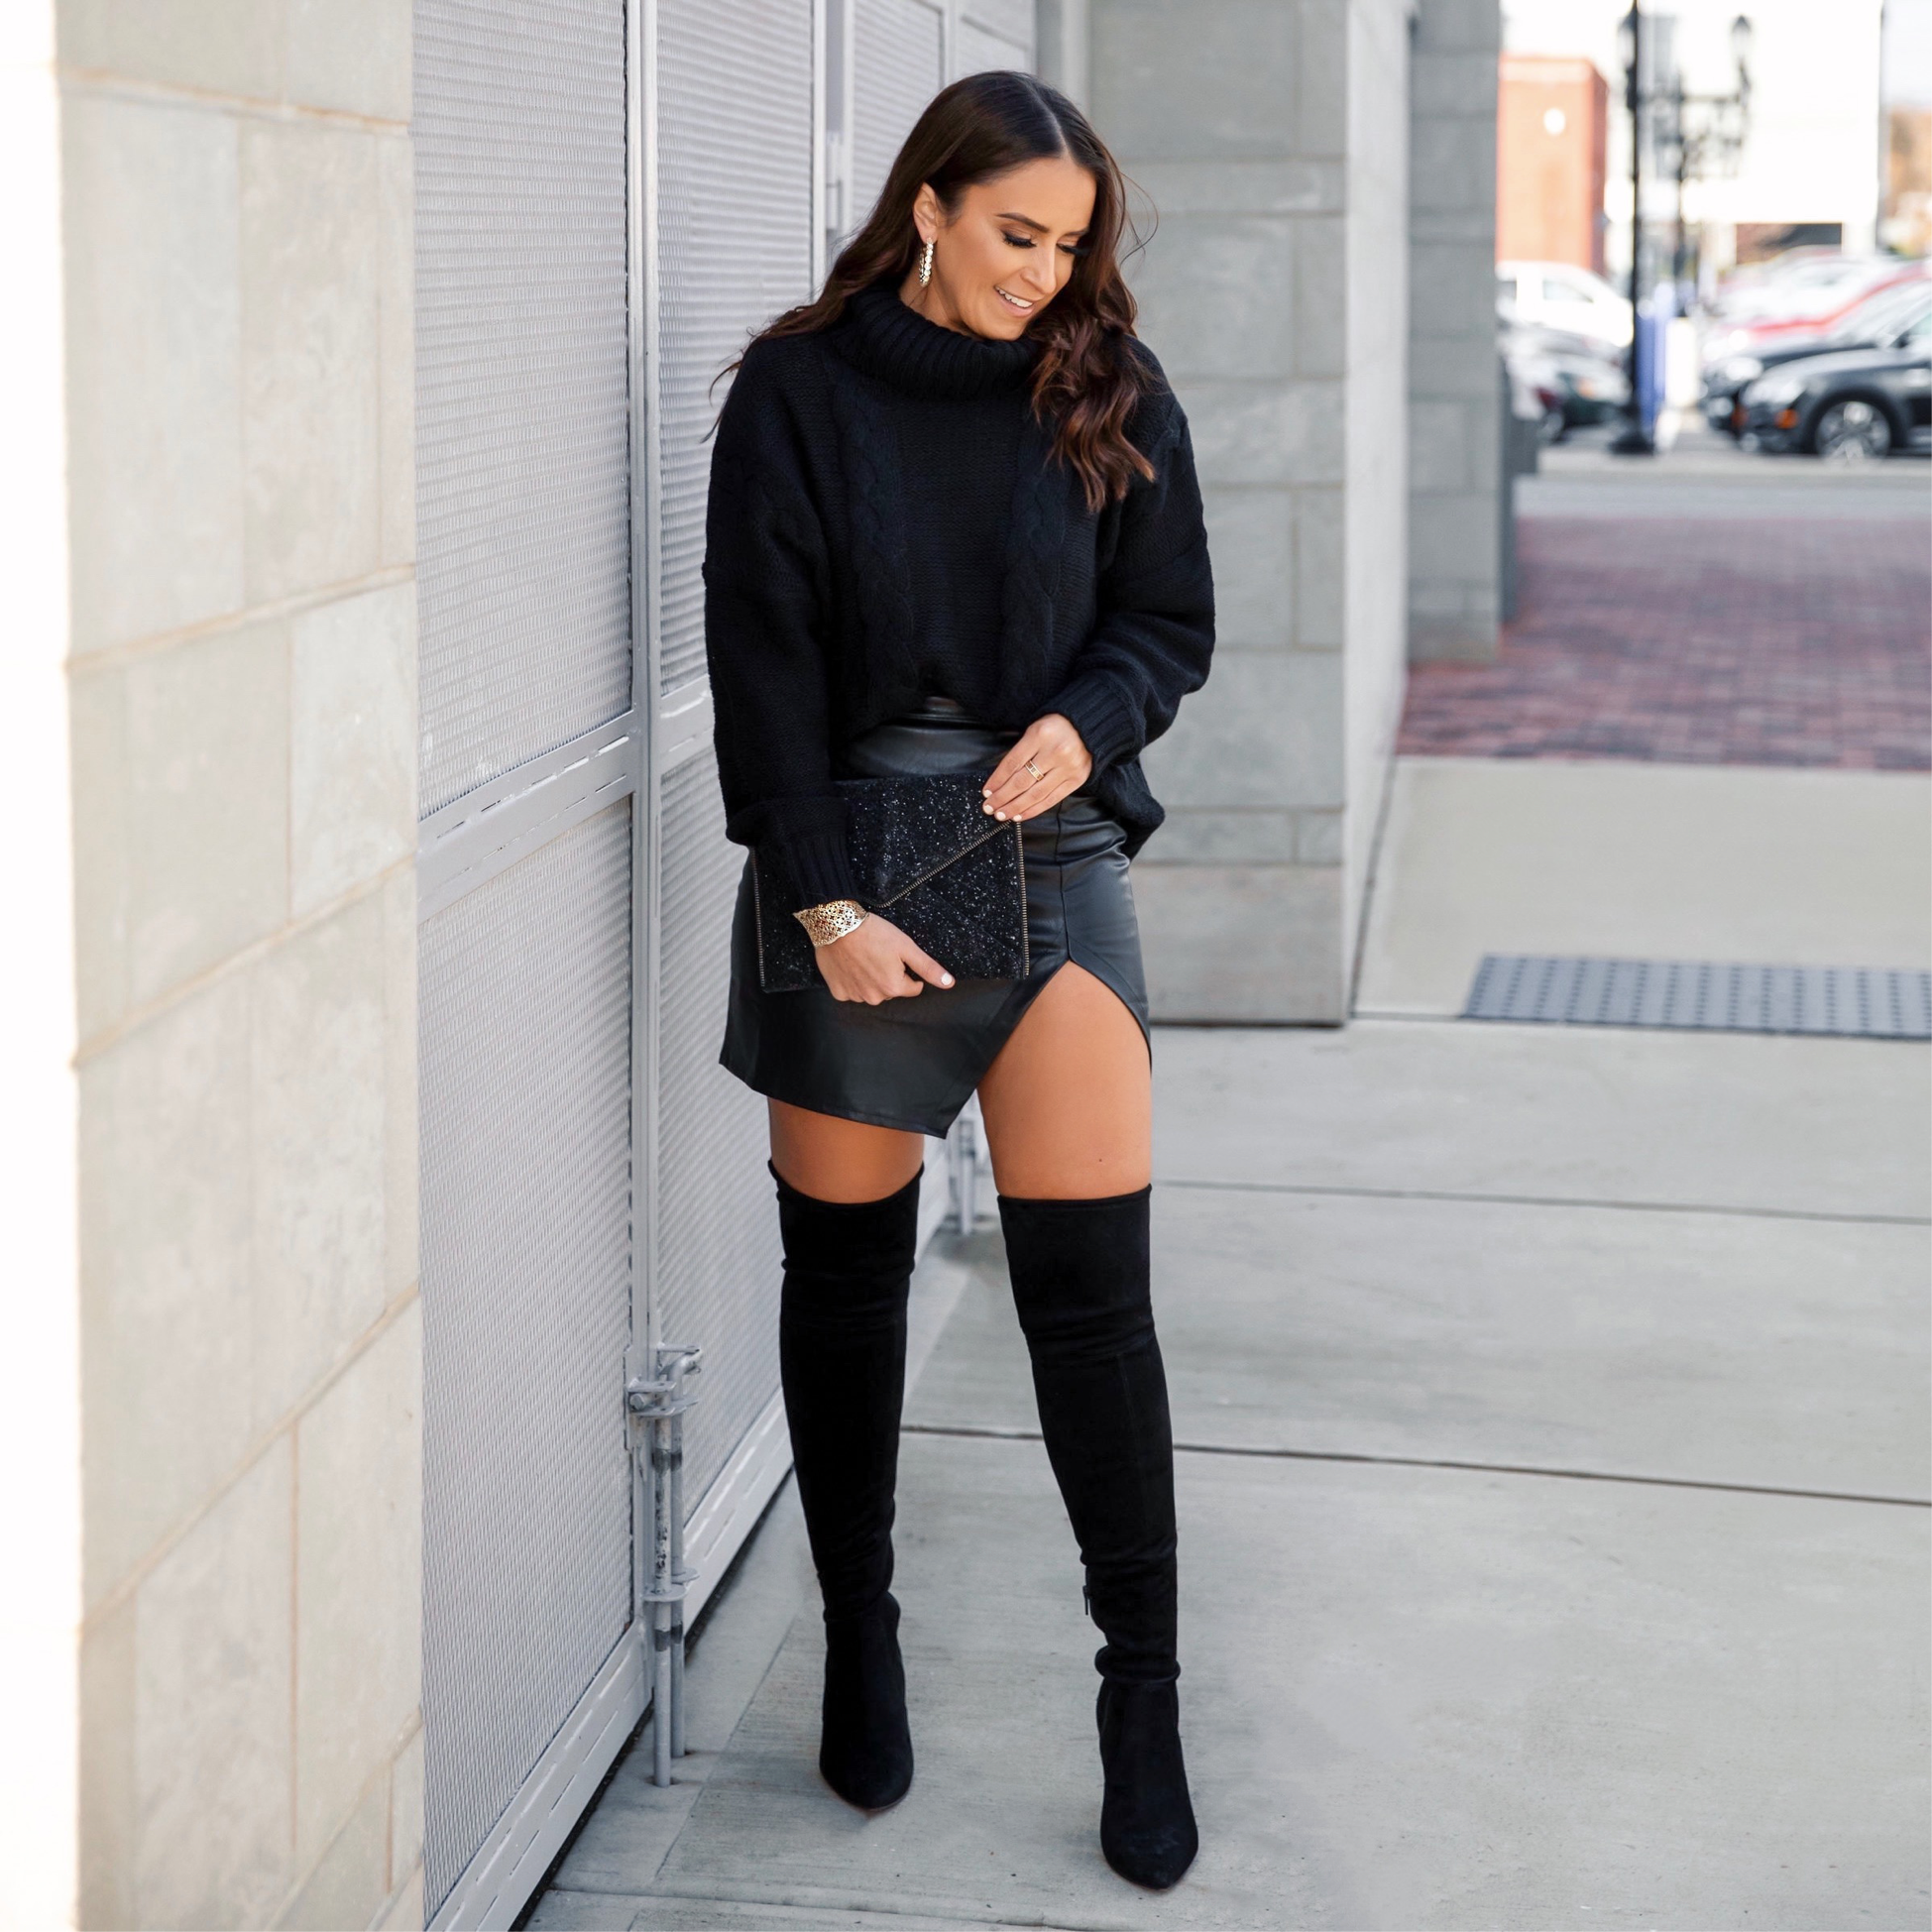 Blogger Sarah Lindner of The House of Sequins wearing an all black party look